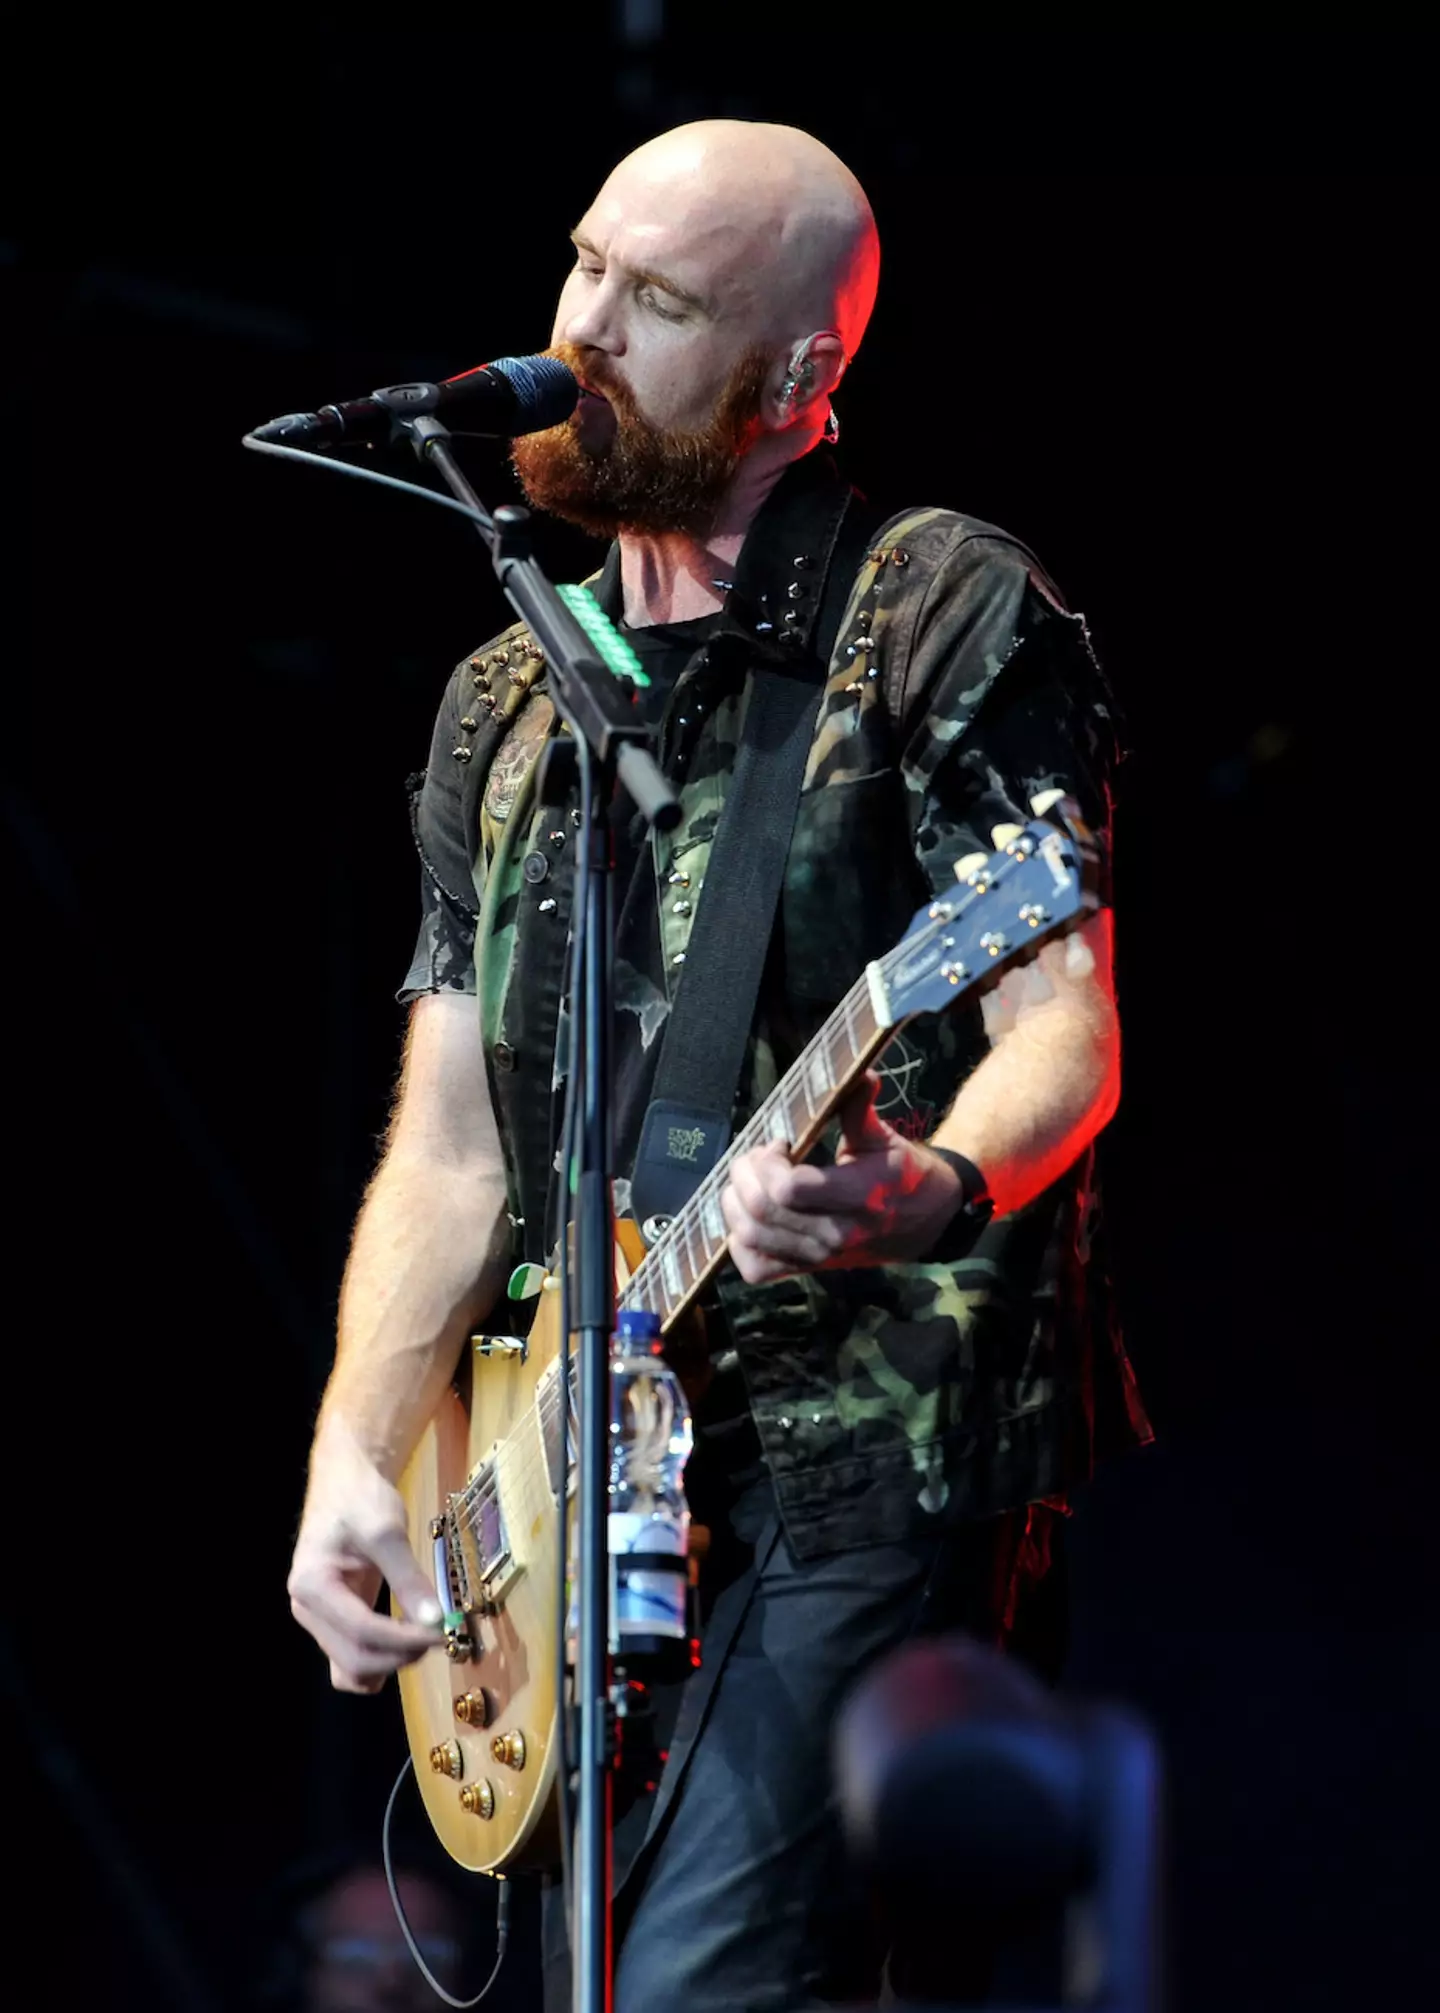 Mark Sheehan, the guitarist for 'The Script', has died at the age of 46 after a brief illness.